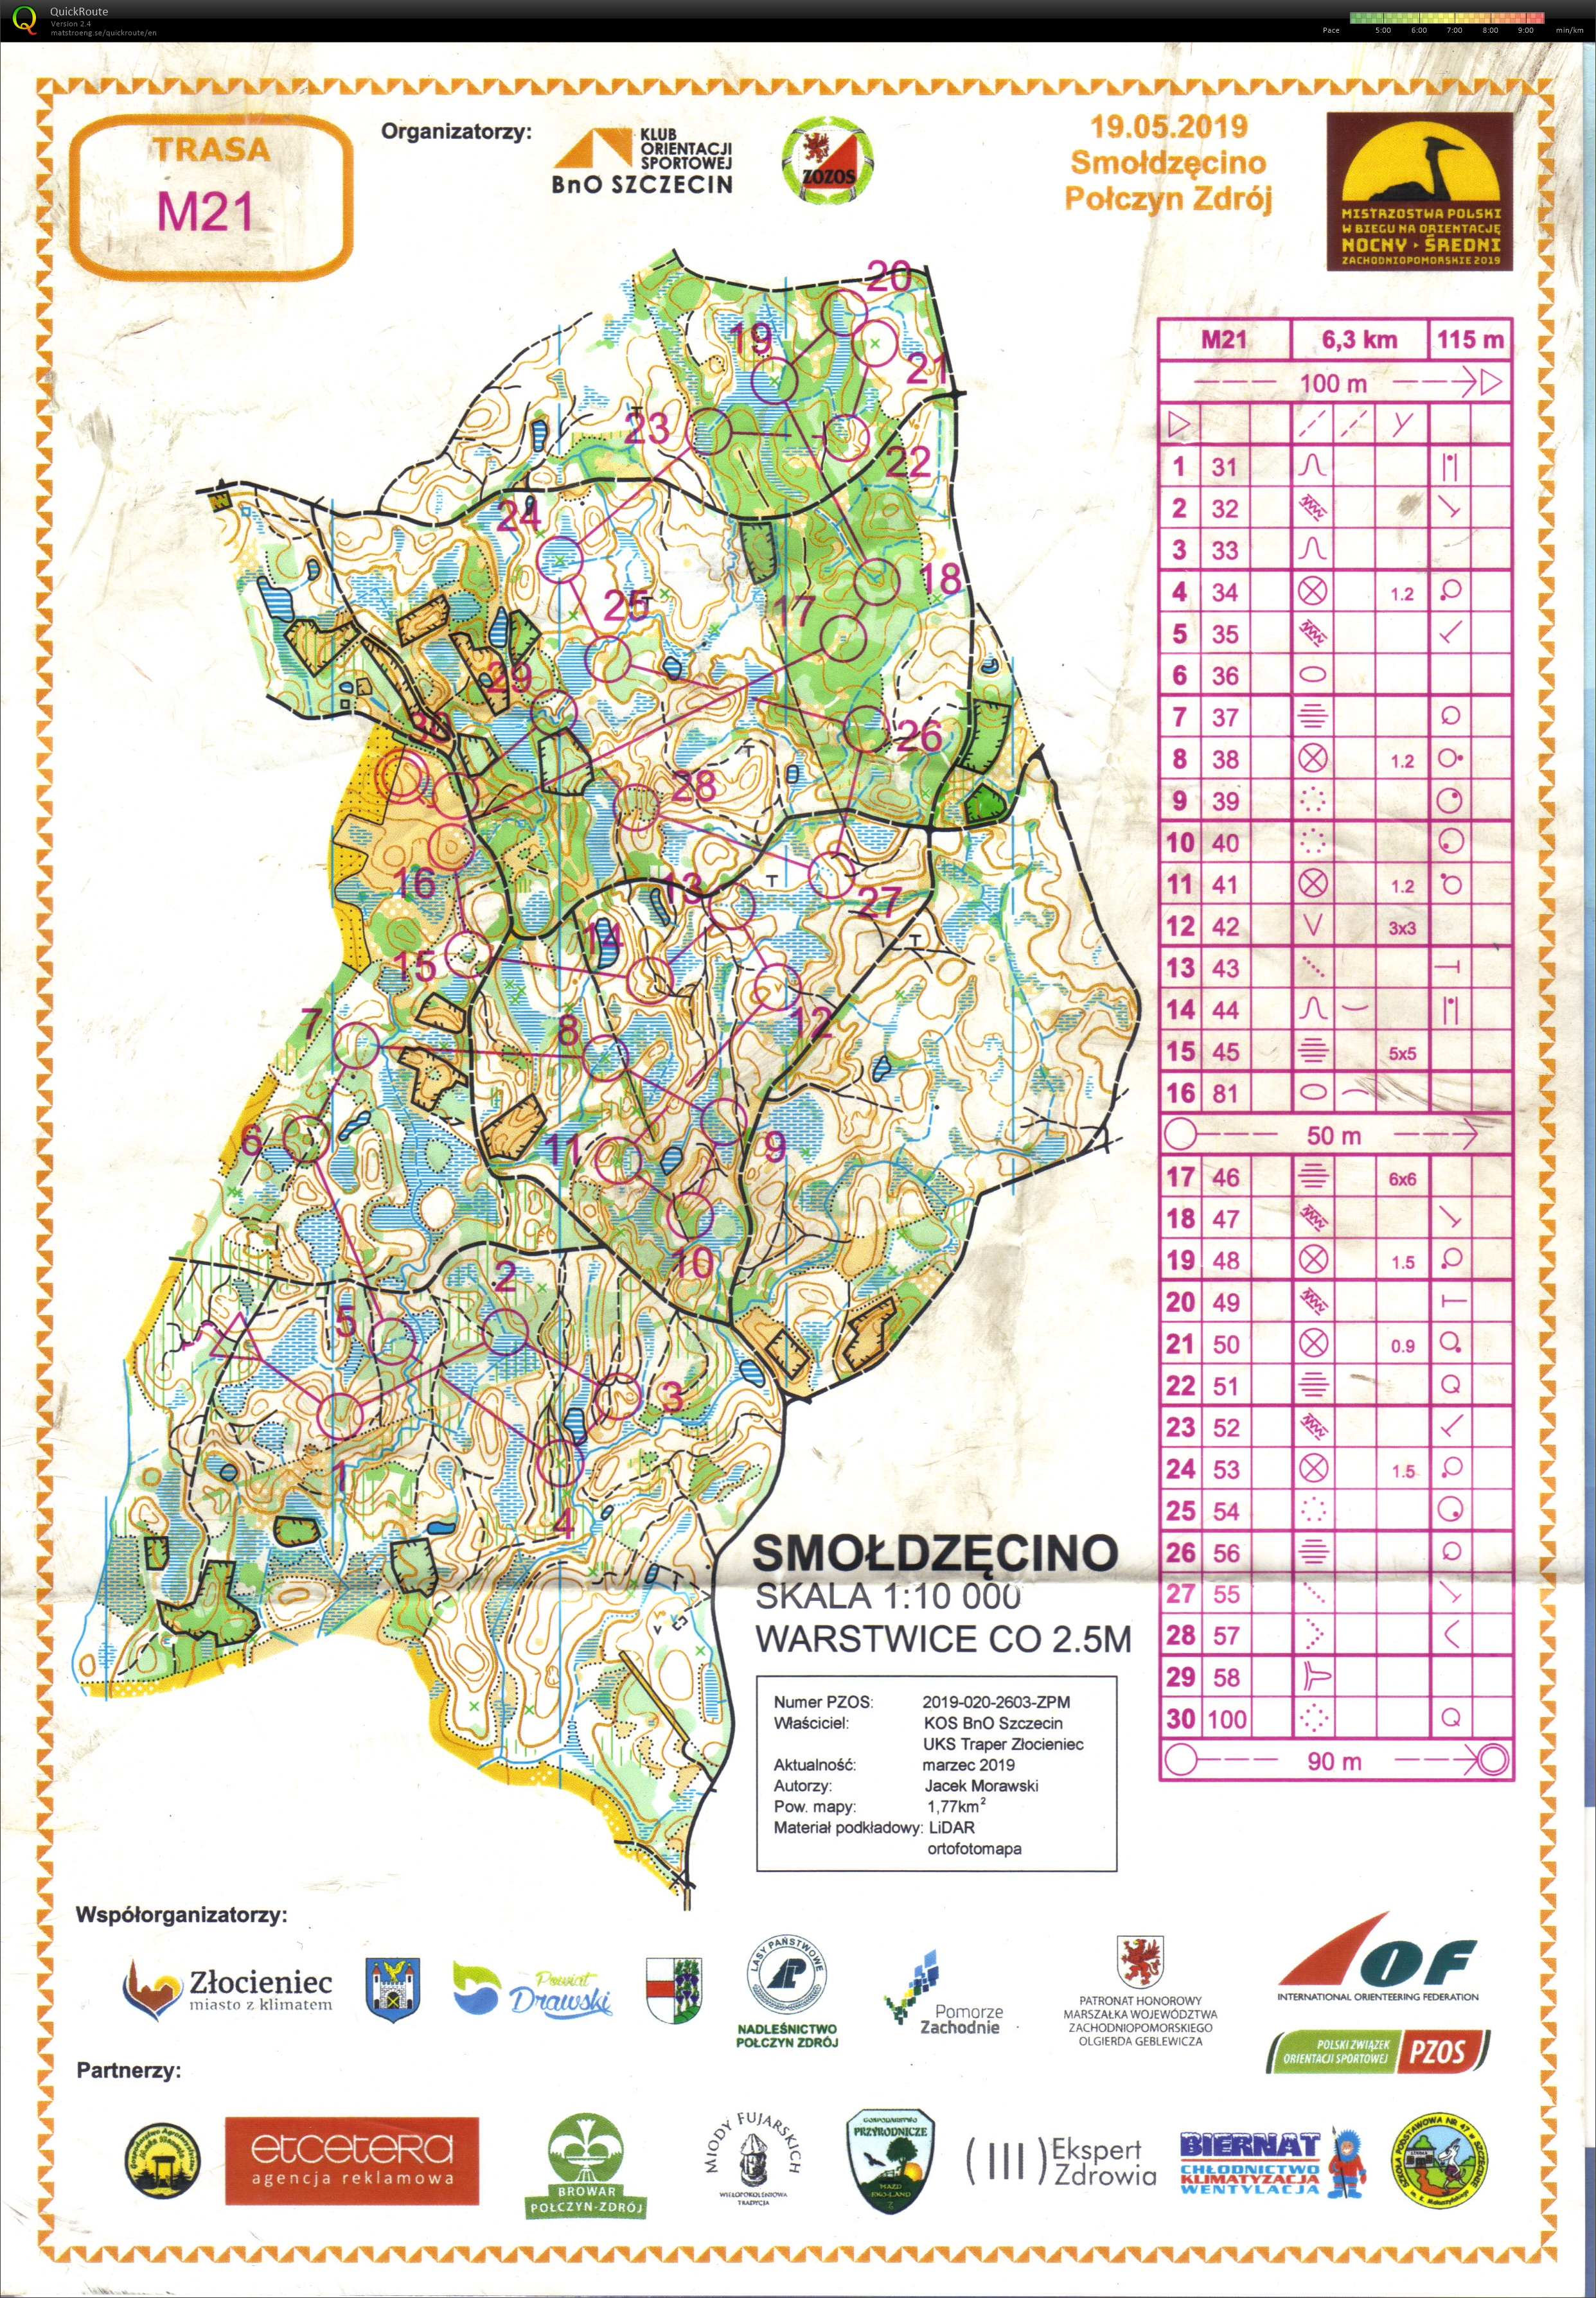 Z667 - Polish Middle Orienteering Championships - middle WRE (20/05/2019)